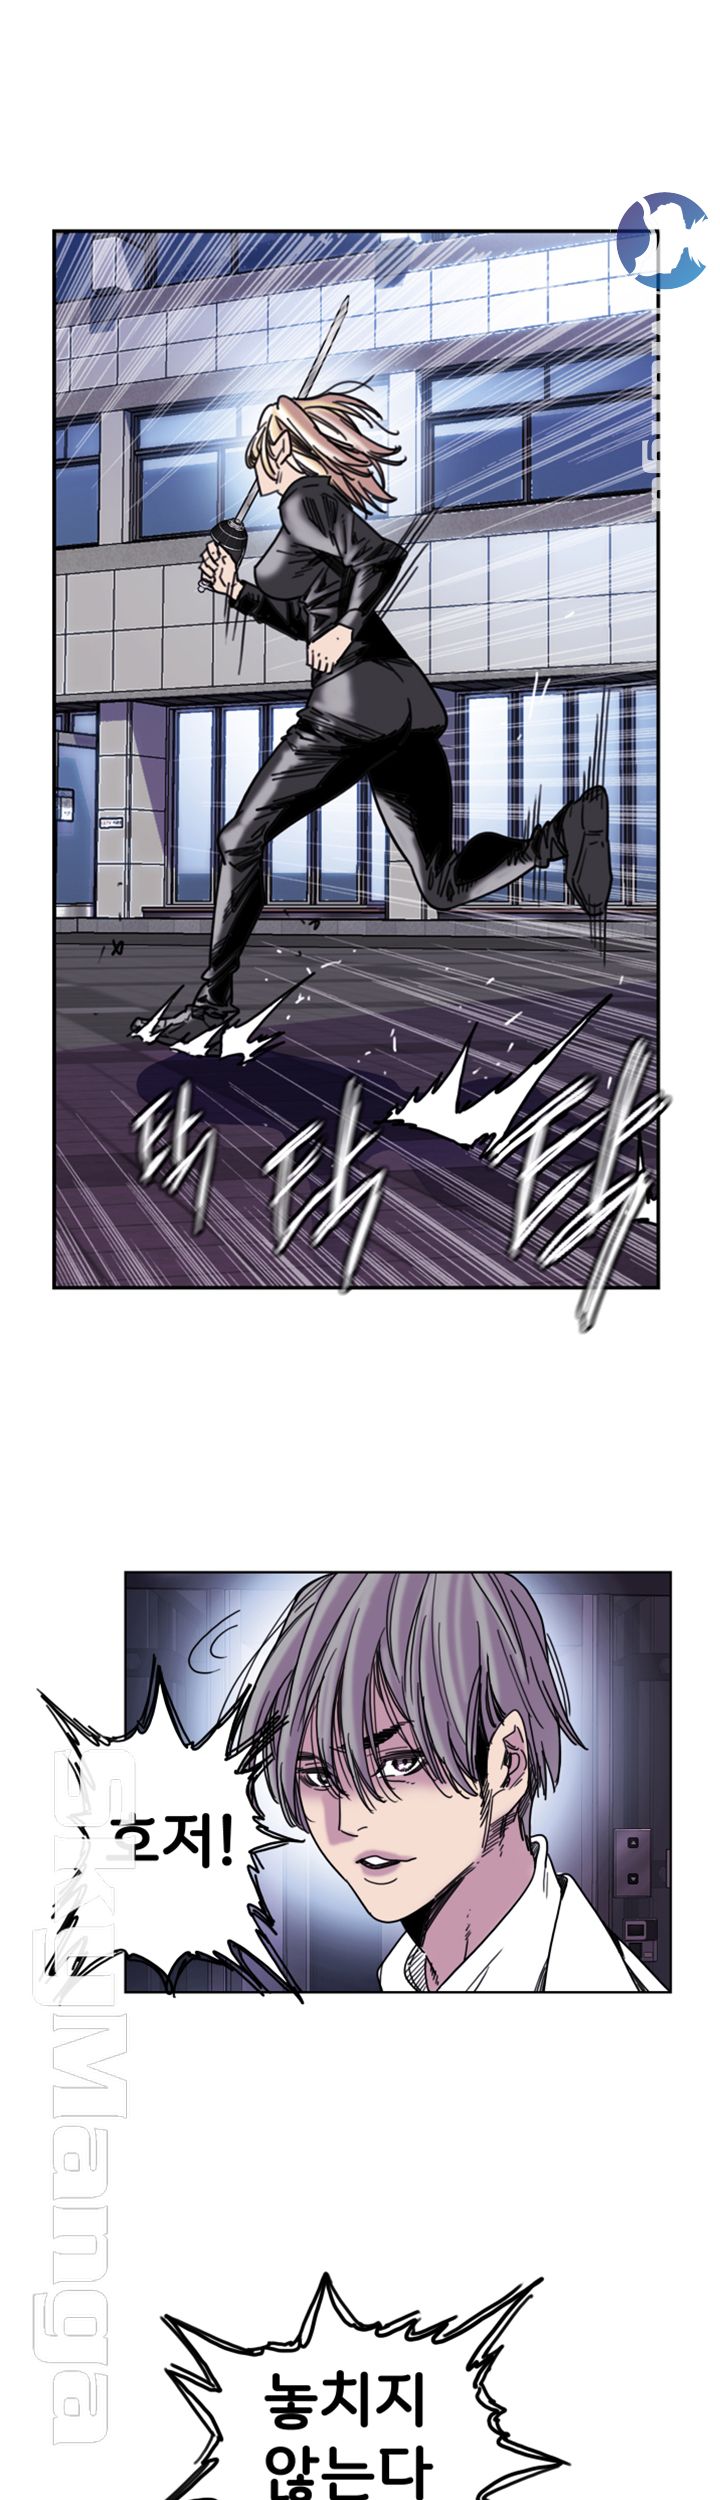 Thorn Raw - Chapter 33 Page 2